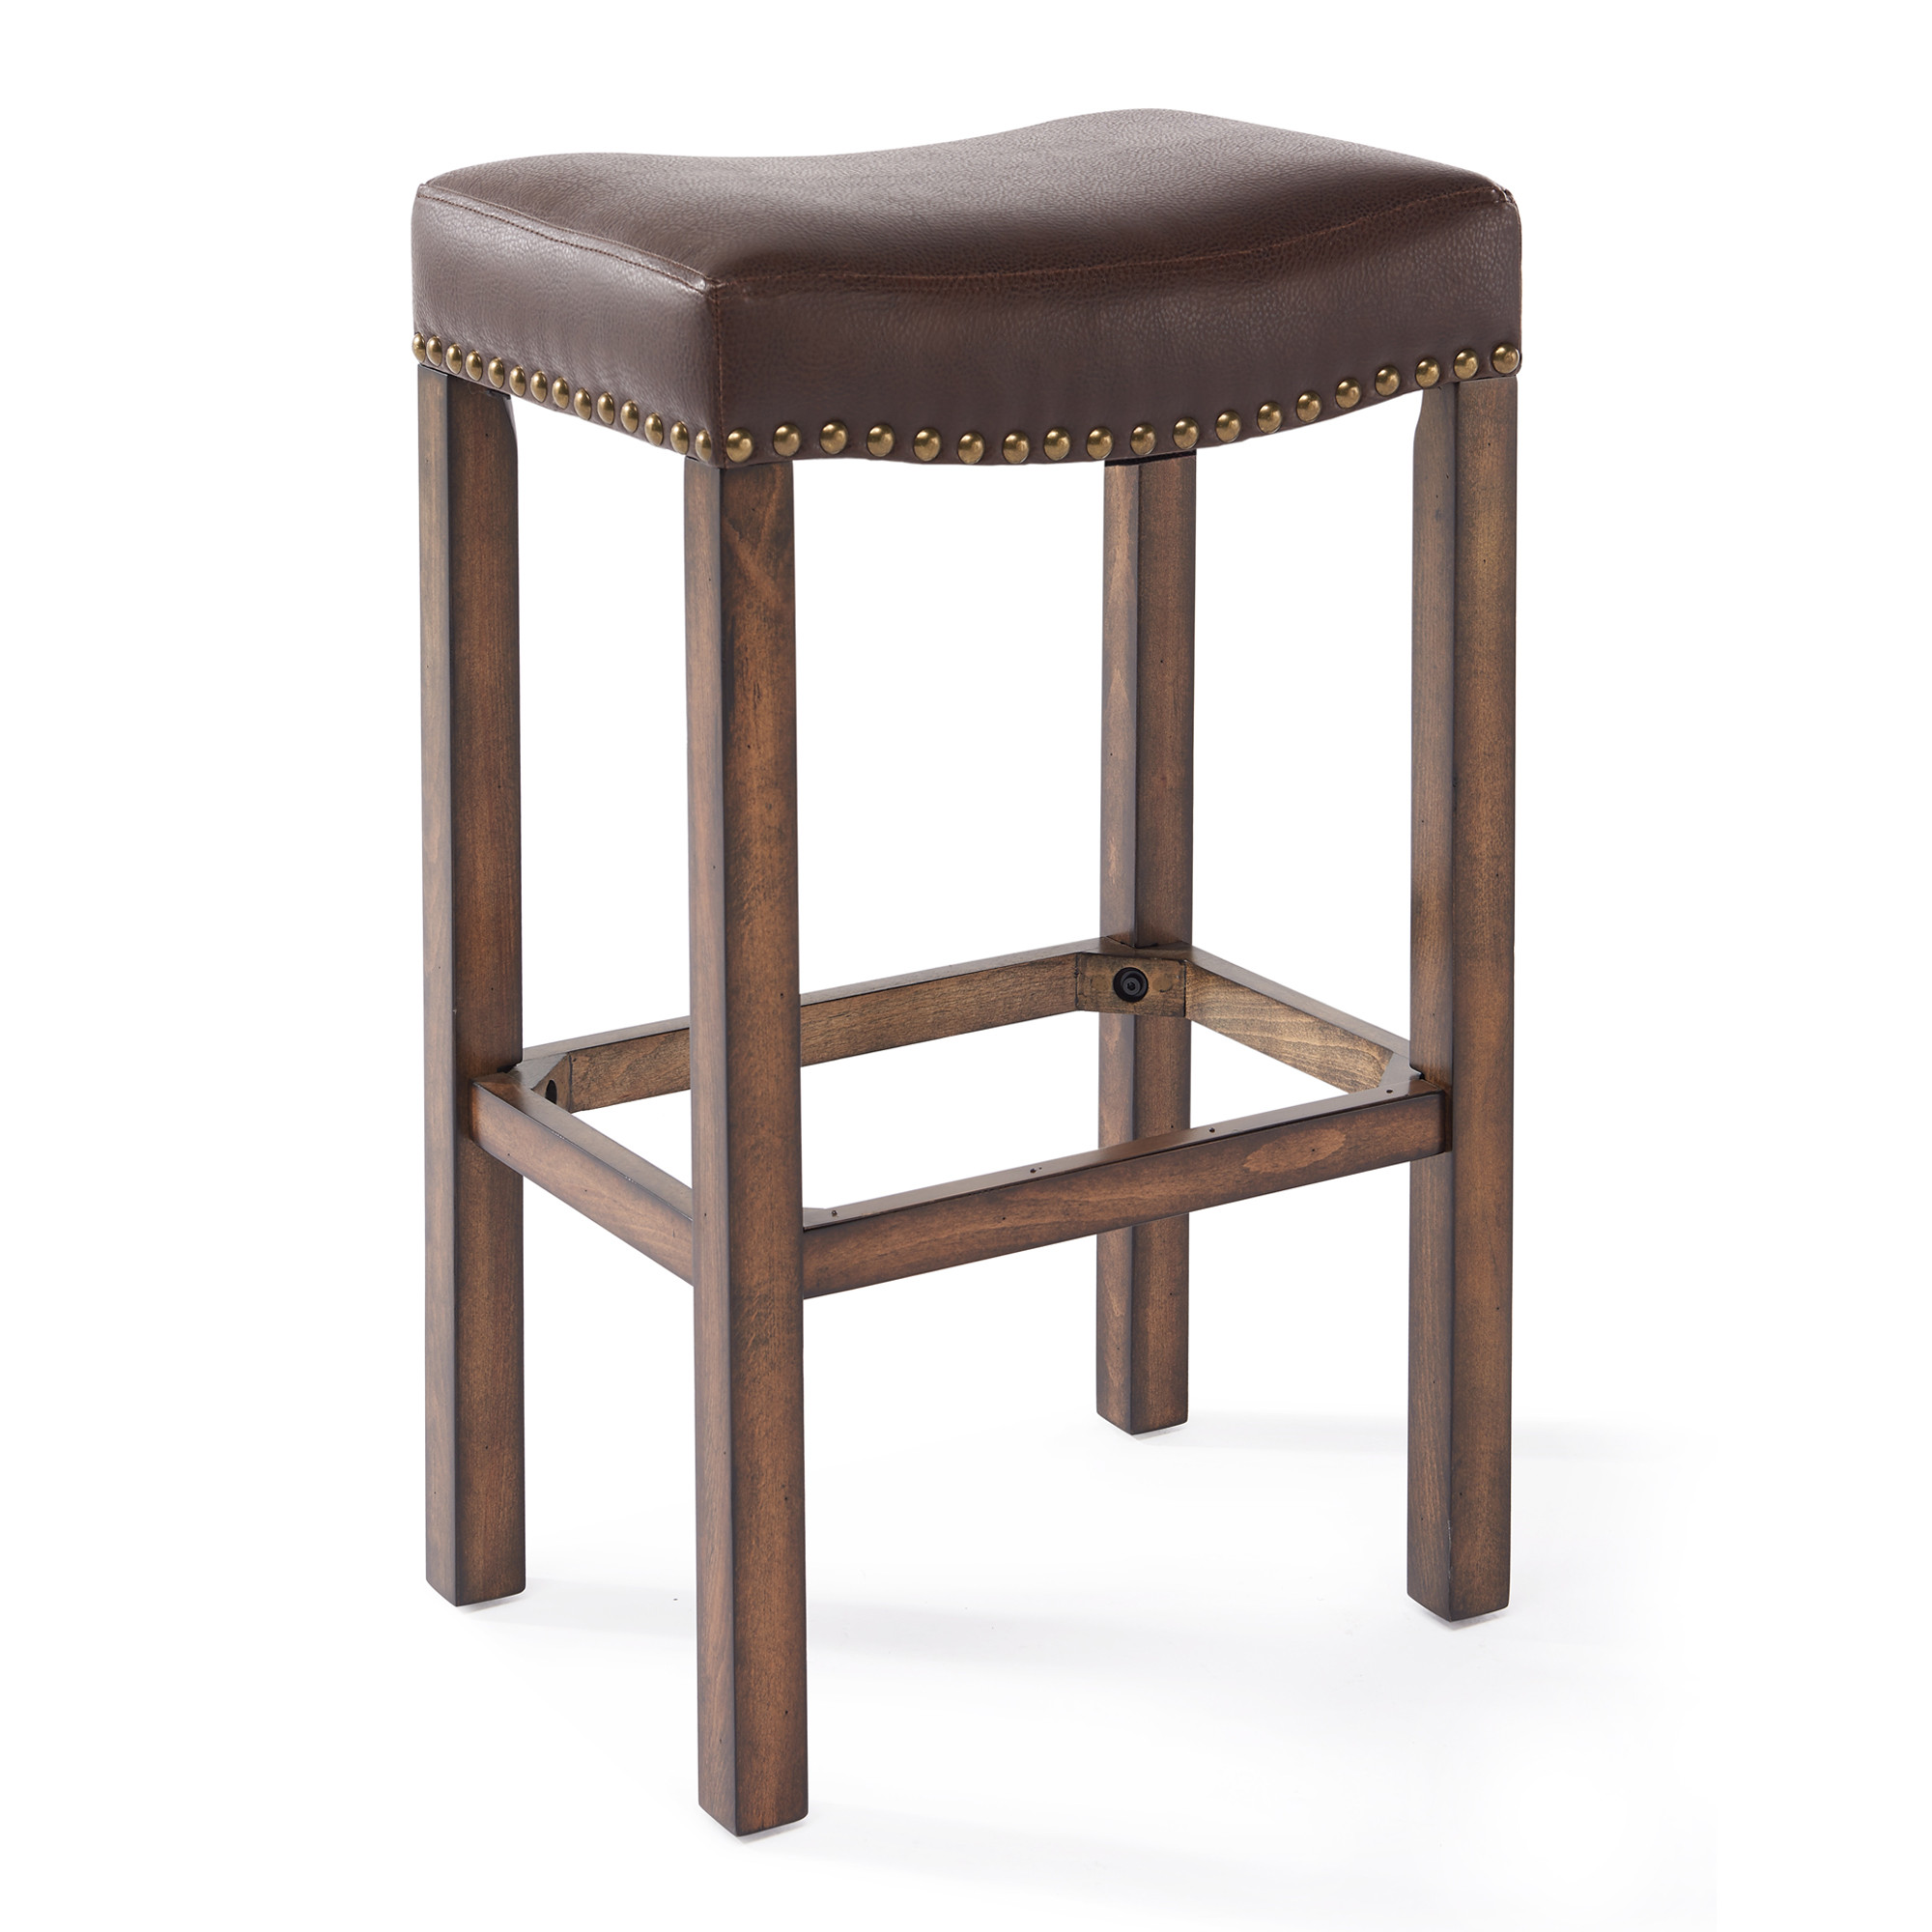 26" Warm Brown Faux Leather Backless Bar Stool